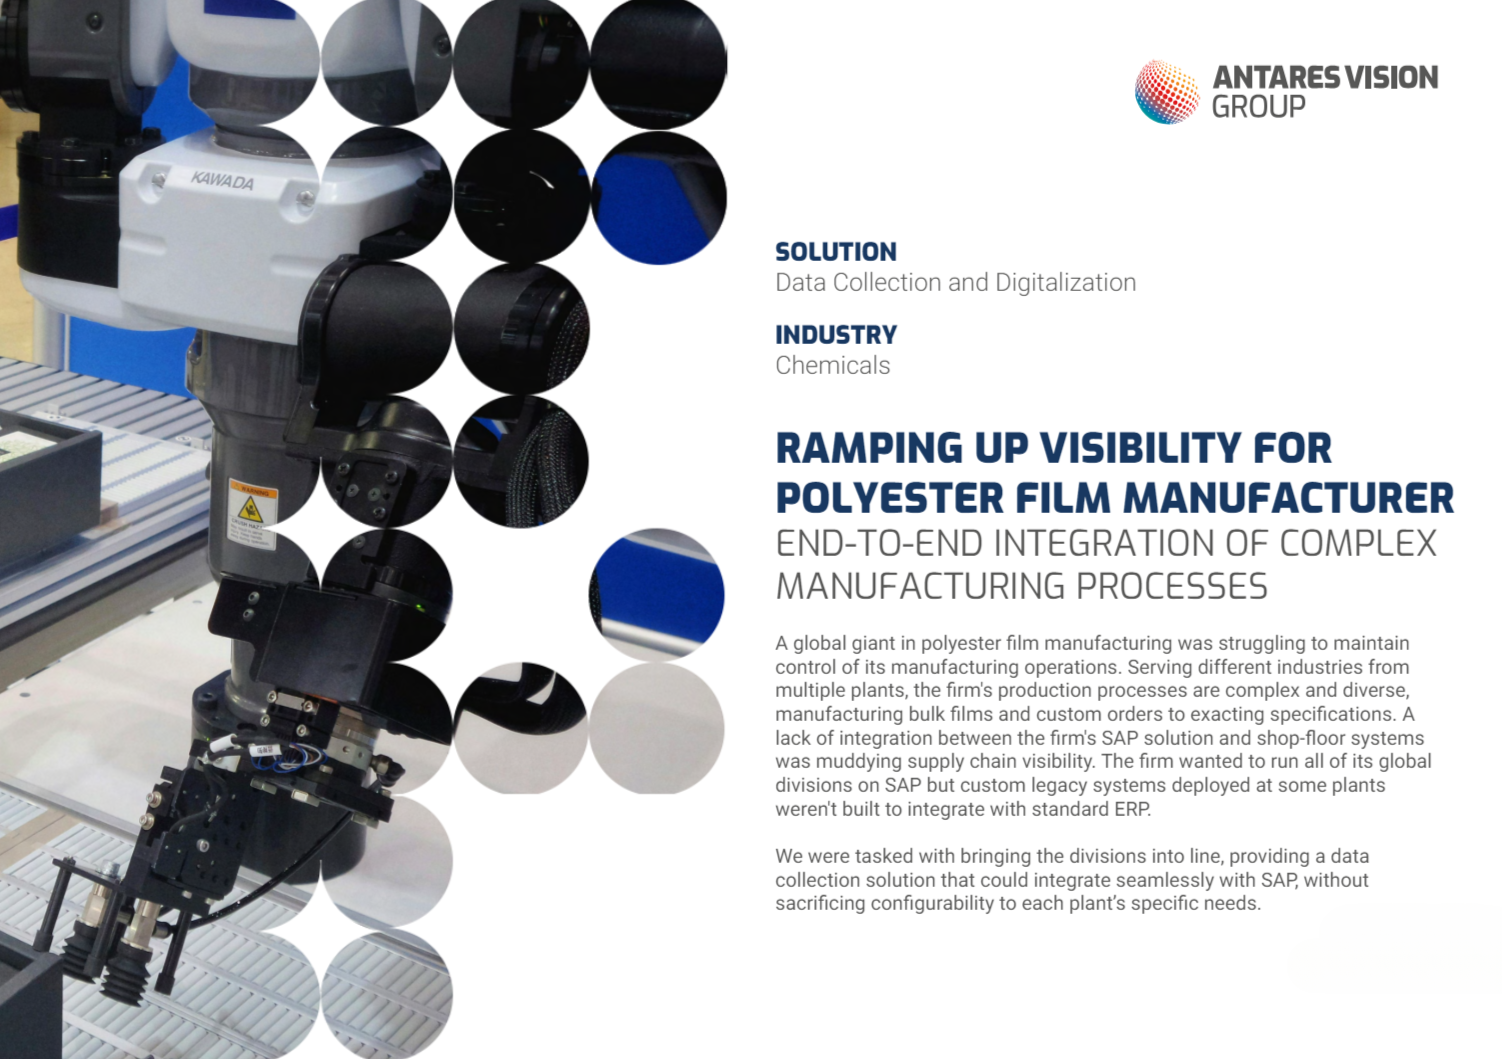 RAMPING UP VISIBILITY FOR POLYESTER FILM MANUFACTURER